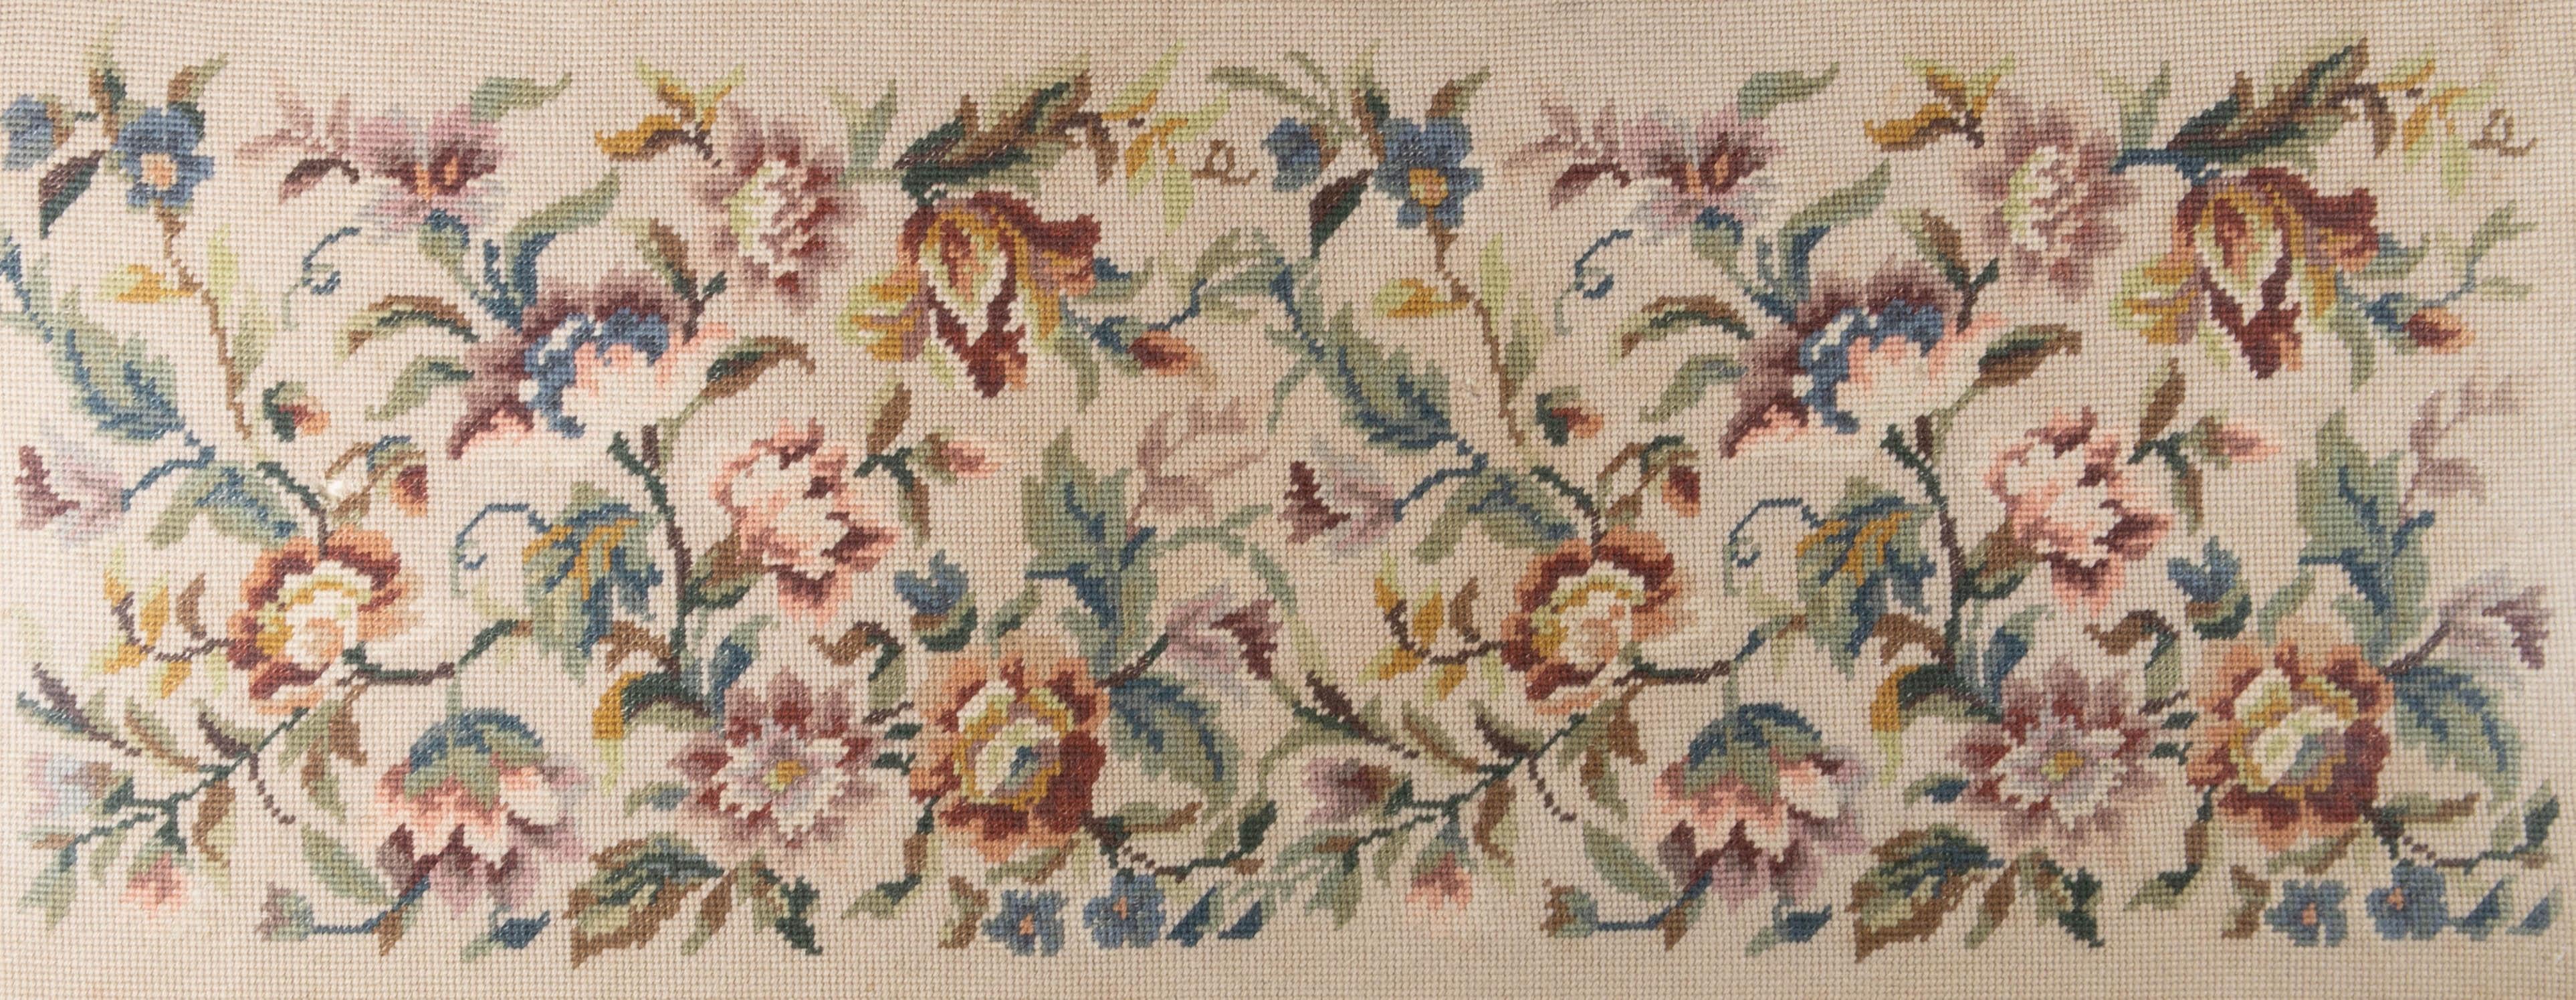 A large work of embroidery depicting flowers and their leaves. Presented glazed in a wooden frame with twisted rope detailing and a gilt-effect inner edge. Unsigned.
